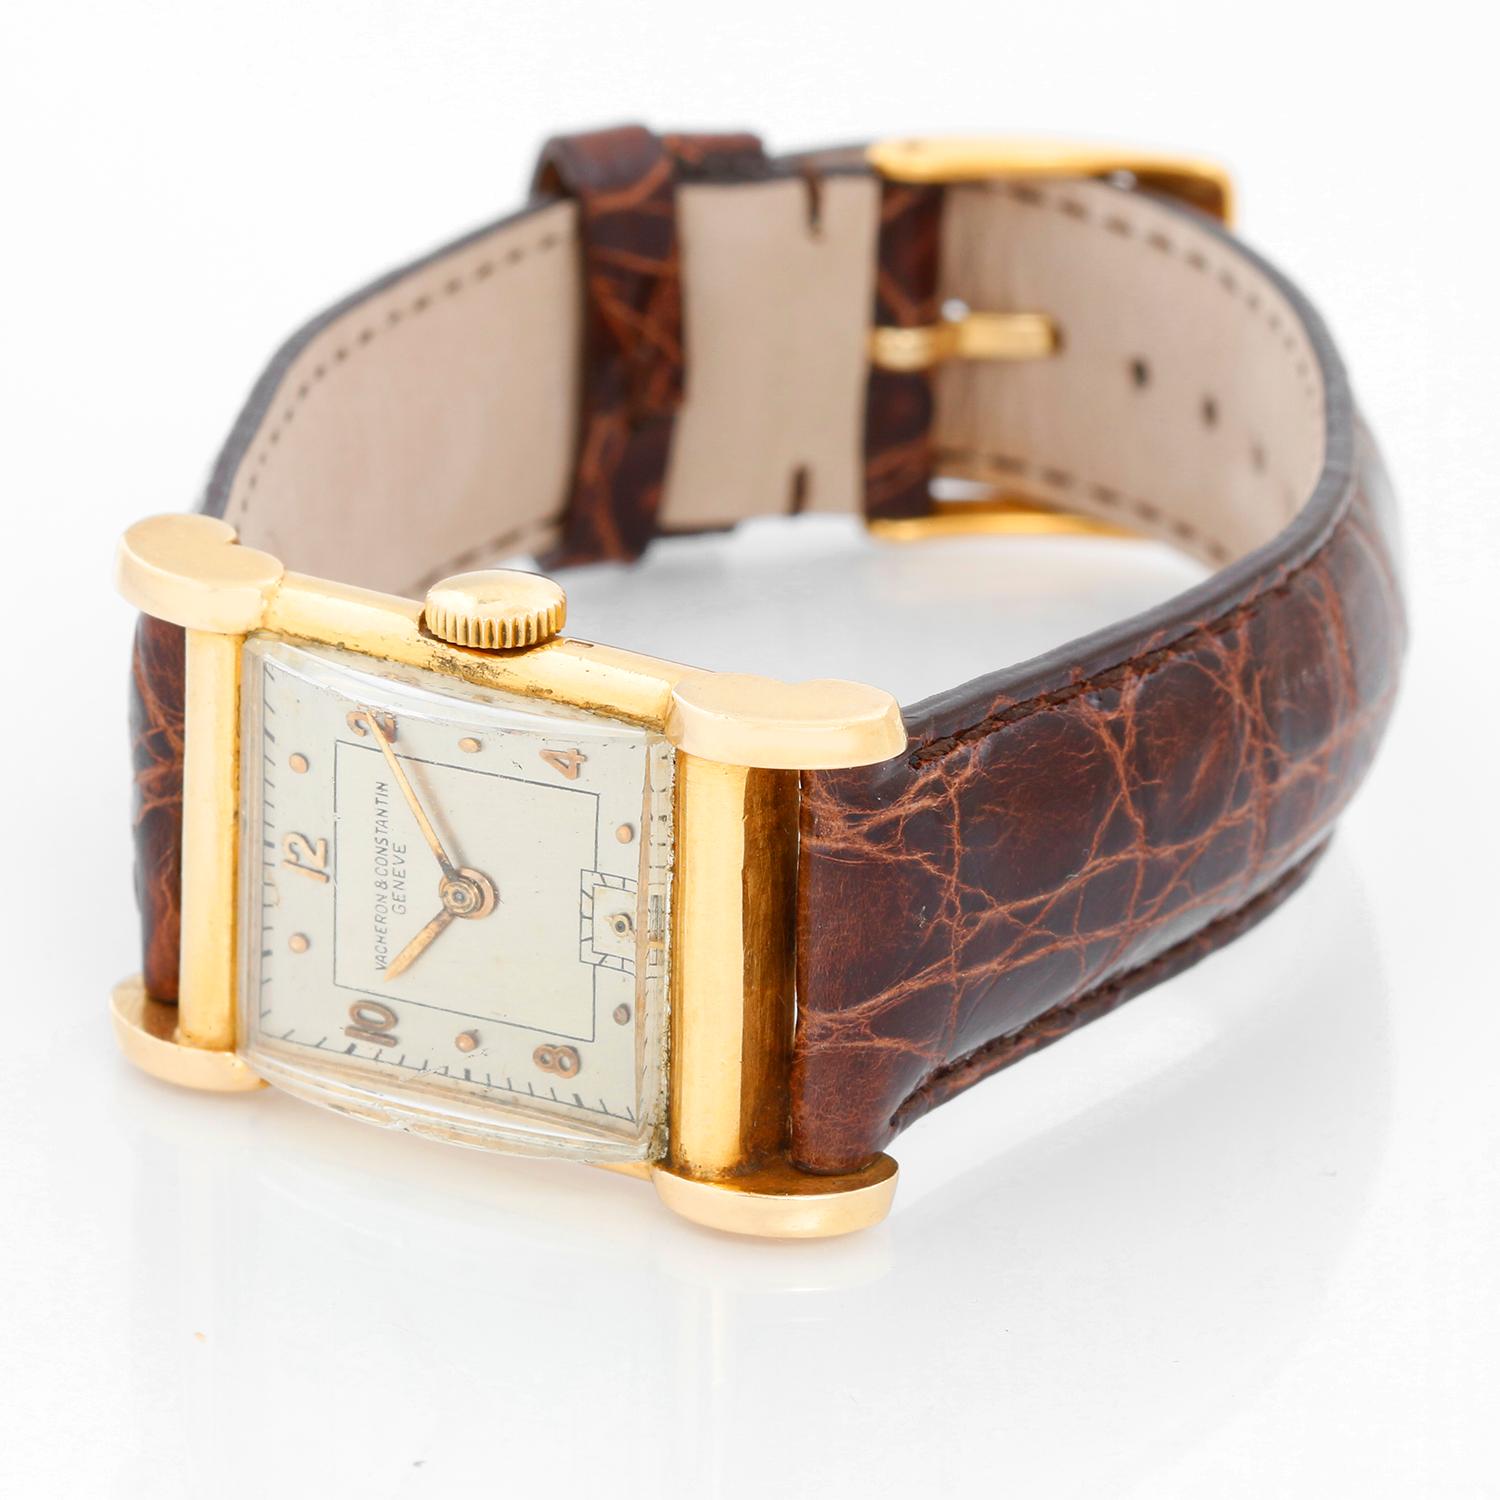 Vintage Vacheron Constantin 18k Gold Art Deco Men's Watch - Manual winding. 18k yellow gold case (22mm diameter). Silver dial with gold Arabic numerals. Brown leather strap band. Vintage, pre-owned, with custom box.